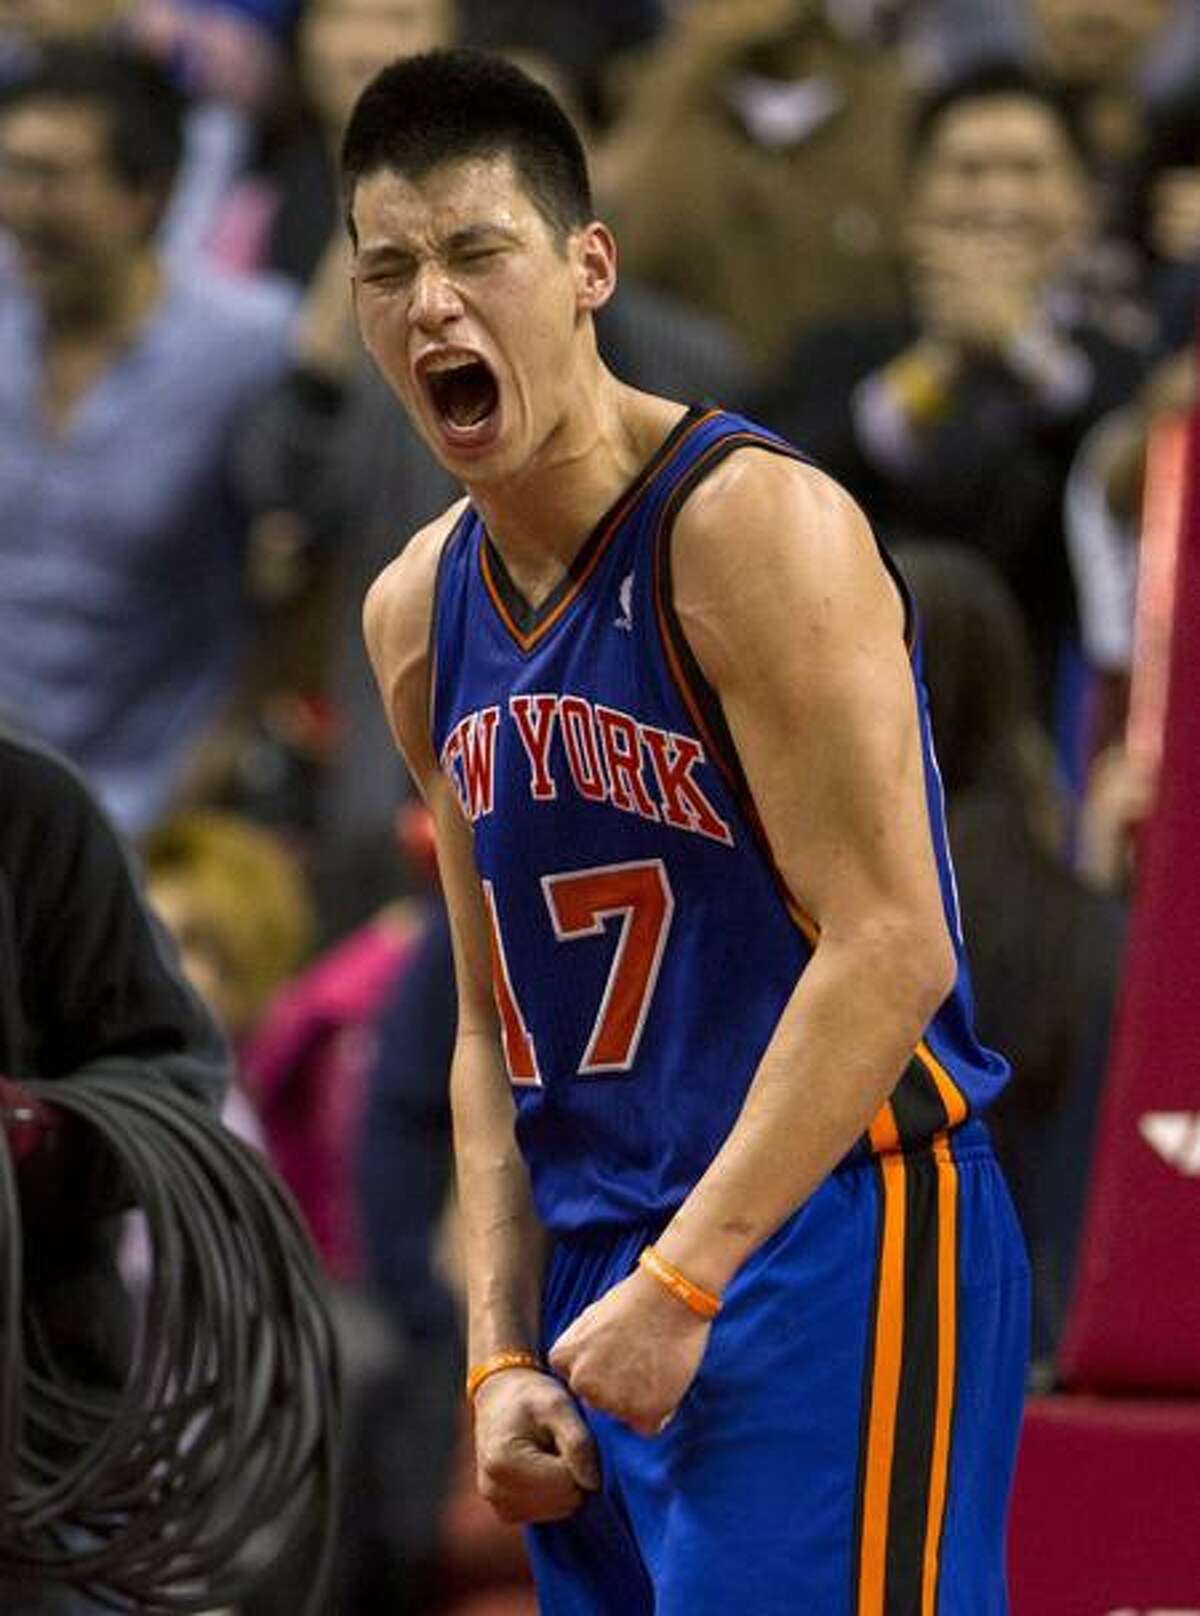 11 years ago, Linsanity was born. Never forget the time Jeremy Lin